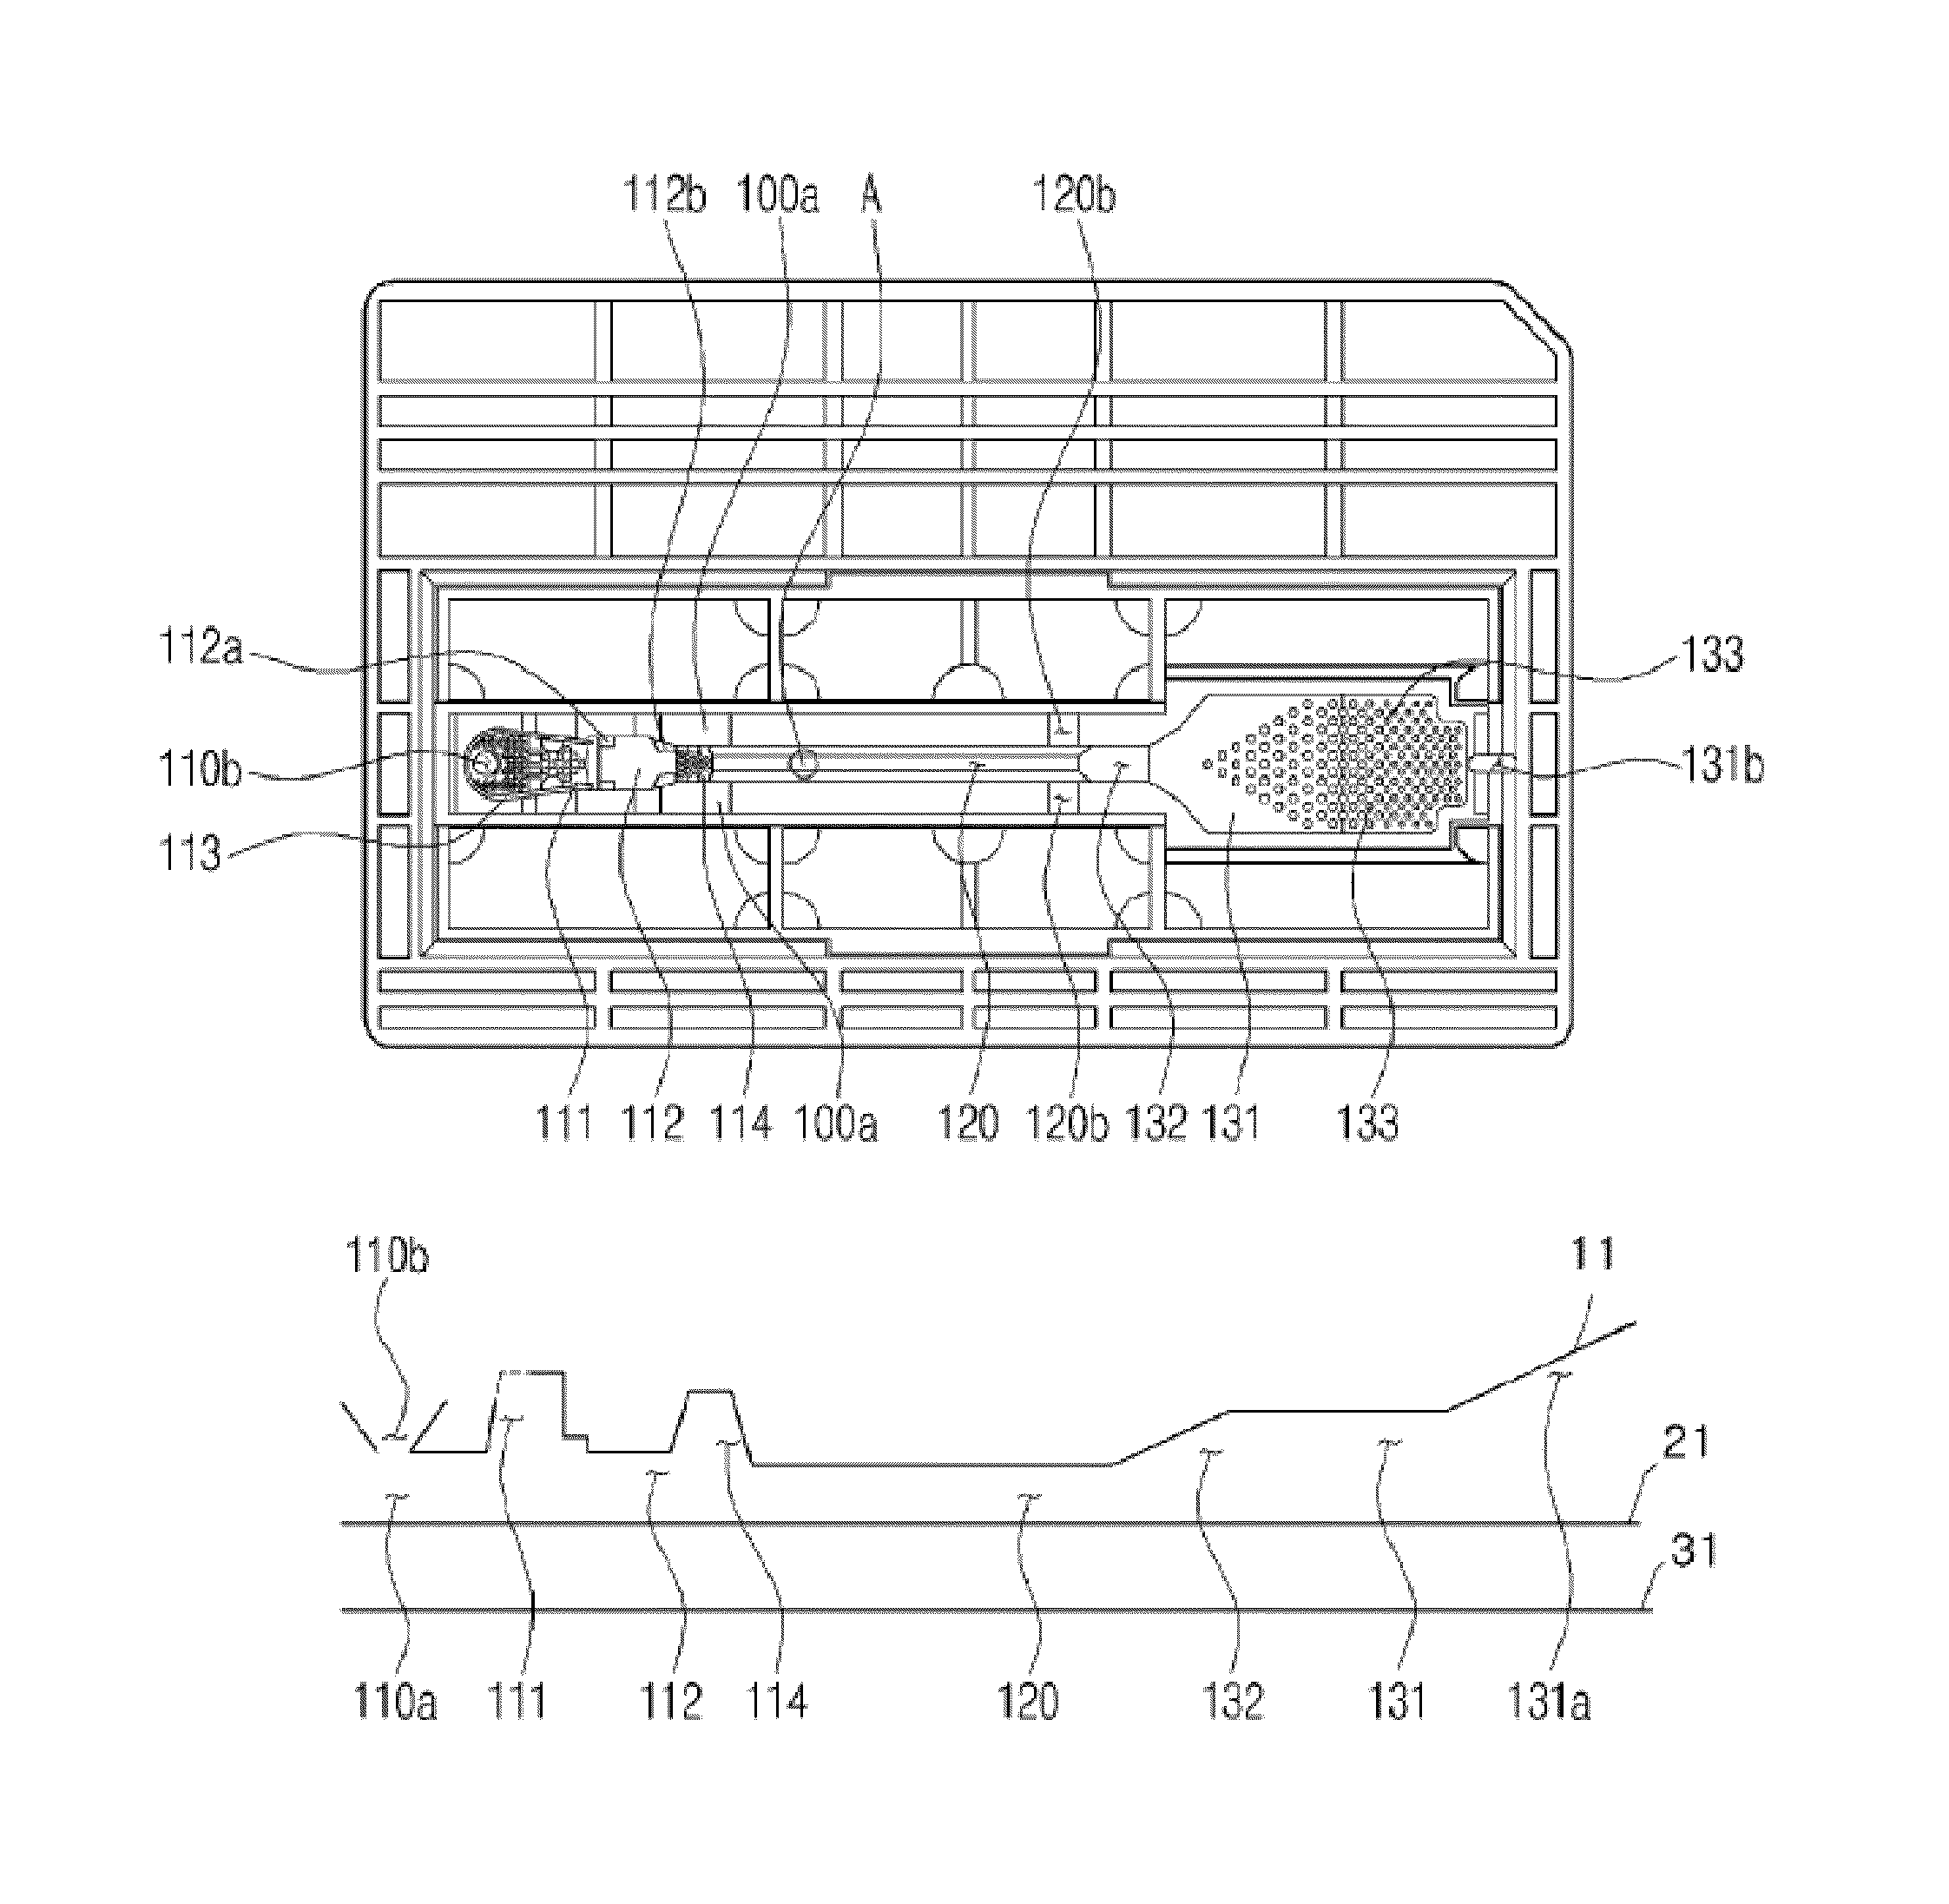 Chip for analyzing fluids being moved without an outside power source